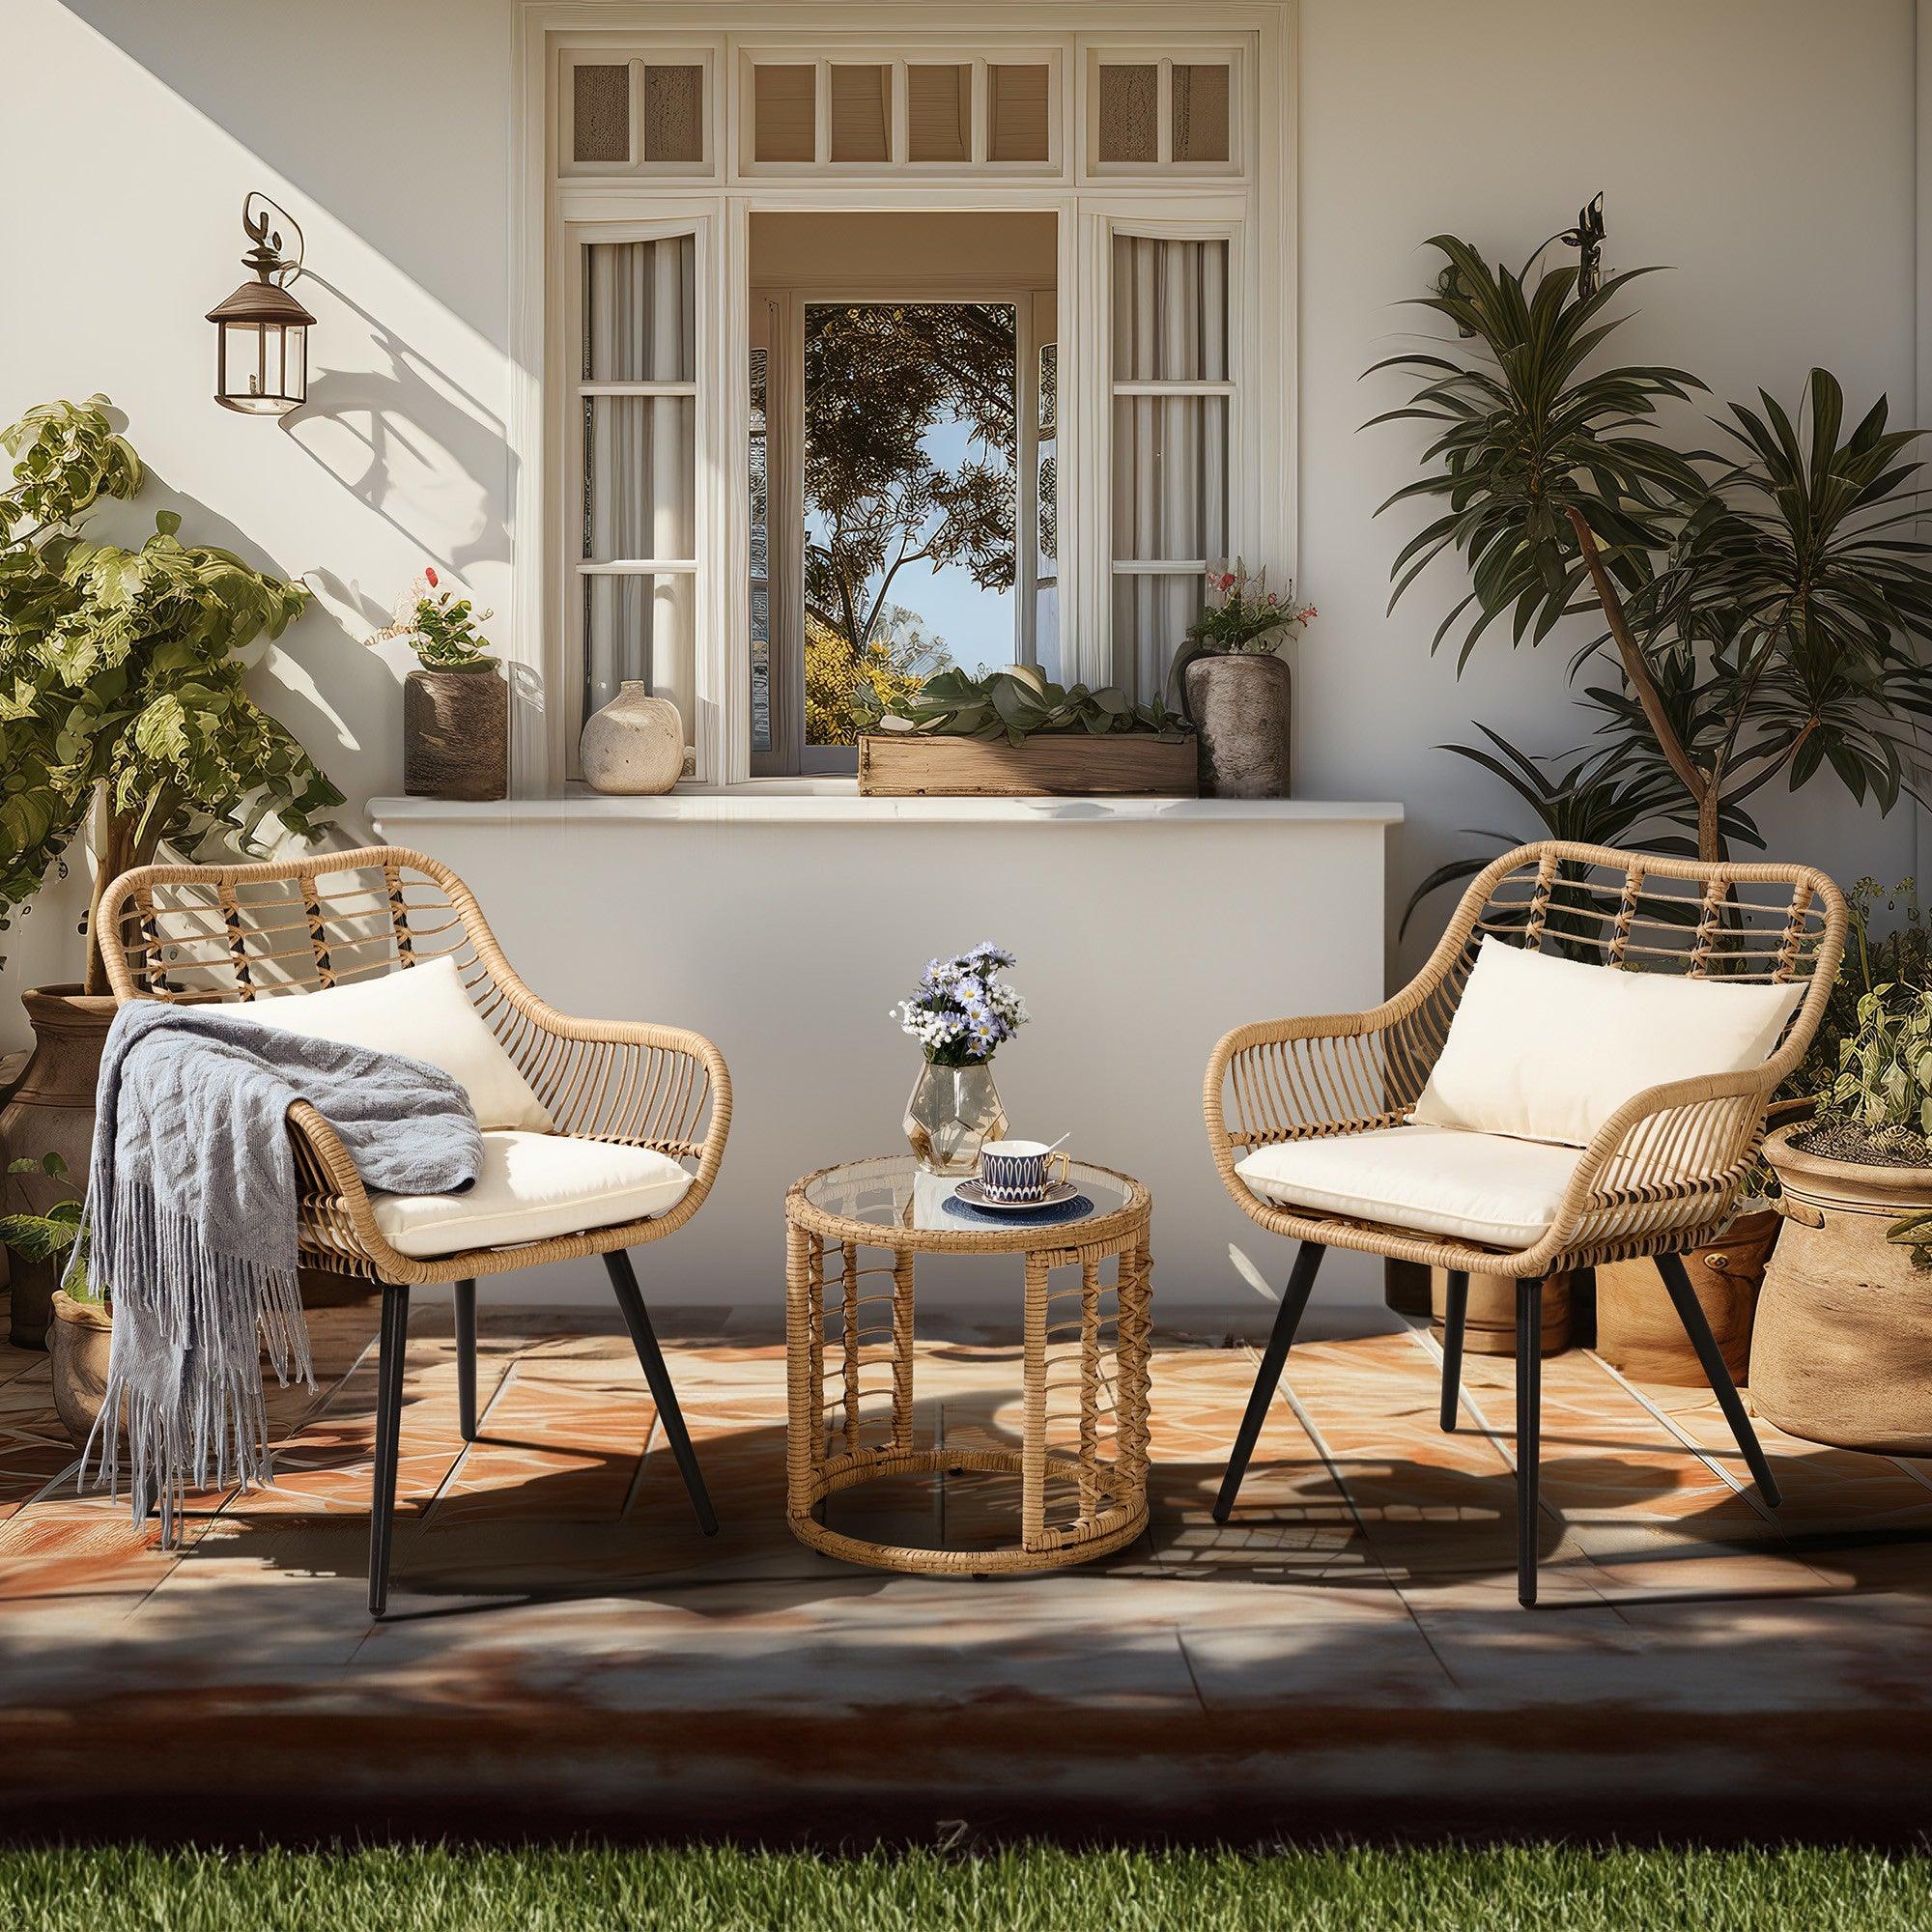 Oia Modern Wicker Outdoor Furniture, 3 Piece Natural Patio Bistro Set with Round Side Table, white cushions, in the patio- Jardina FurnitureOia Modern Wicker Outdoor Furniture with steel frame, 3Pcs Natural Patio Bistro Set with Round Side Table, white cushions, side view- Jardina Furniture#color_White